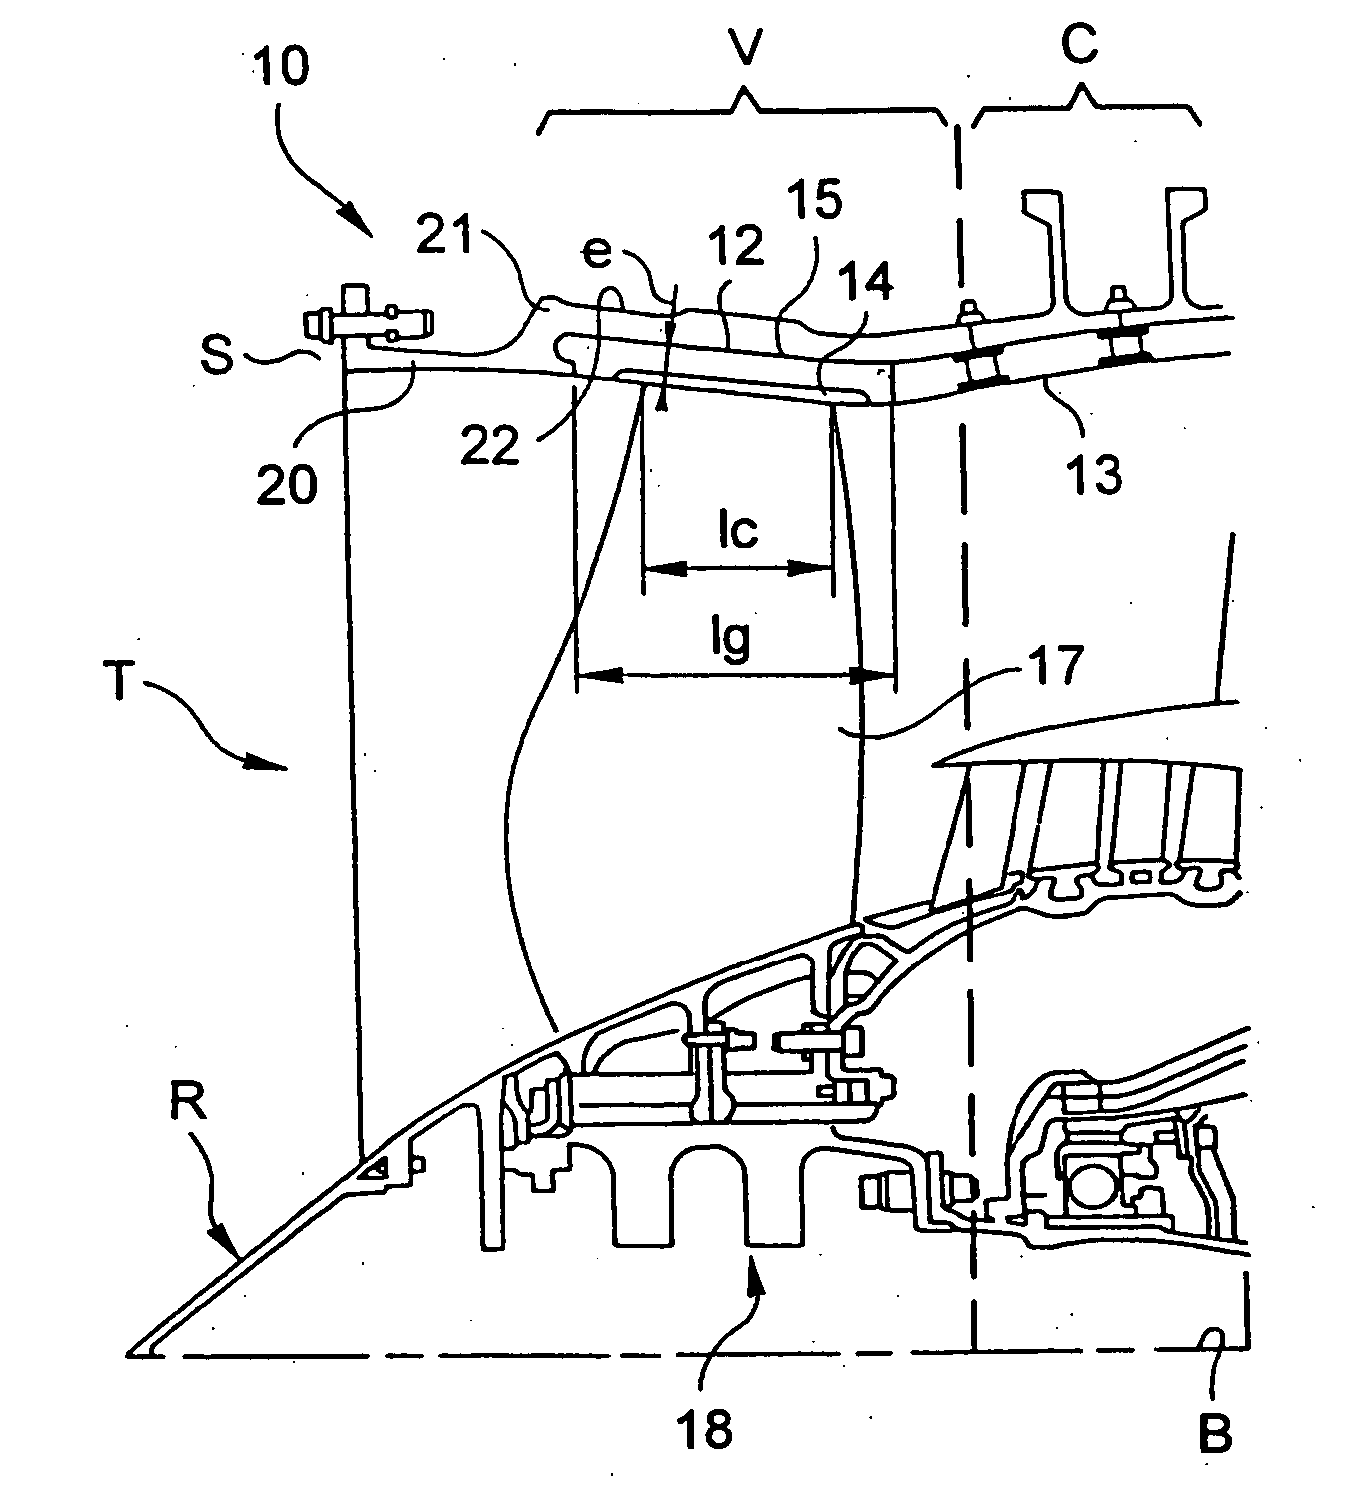 Abradable device on the blower casing of a gas turbine engine